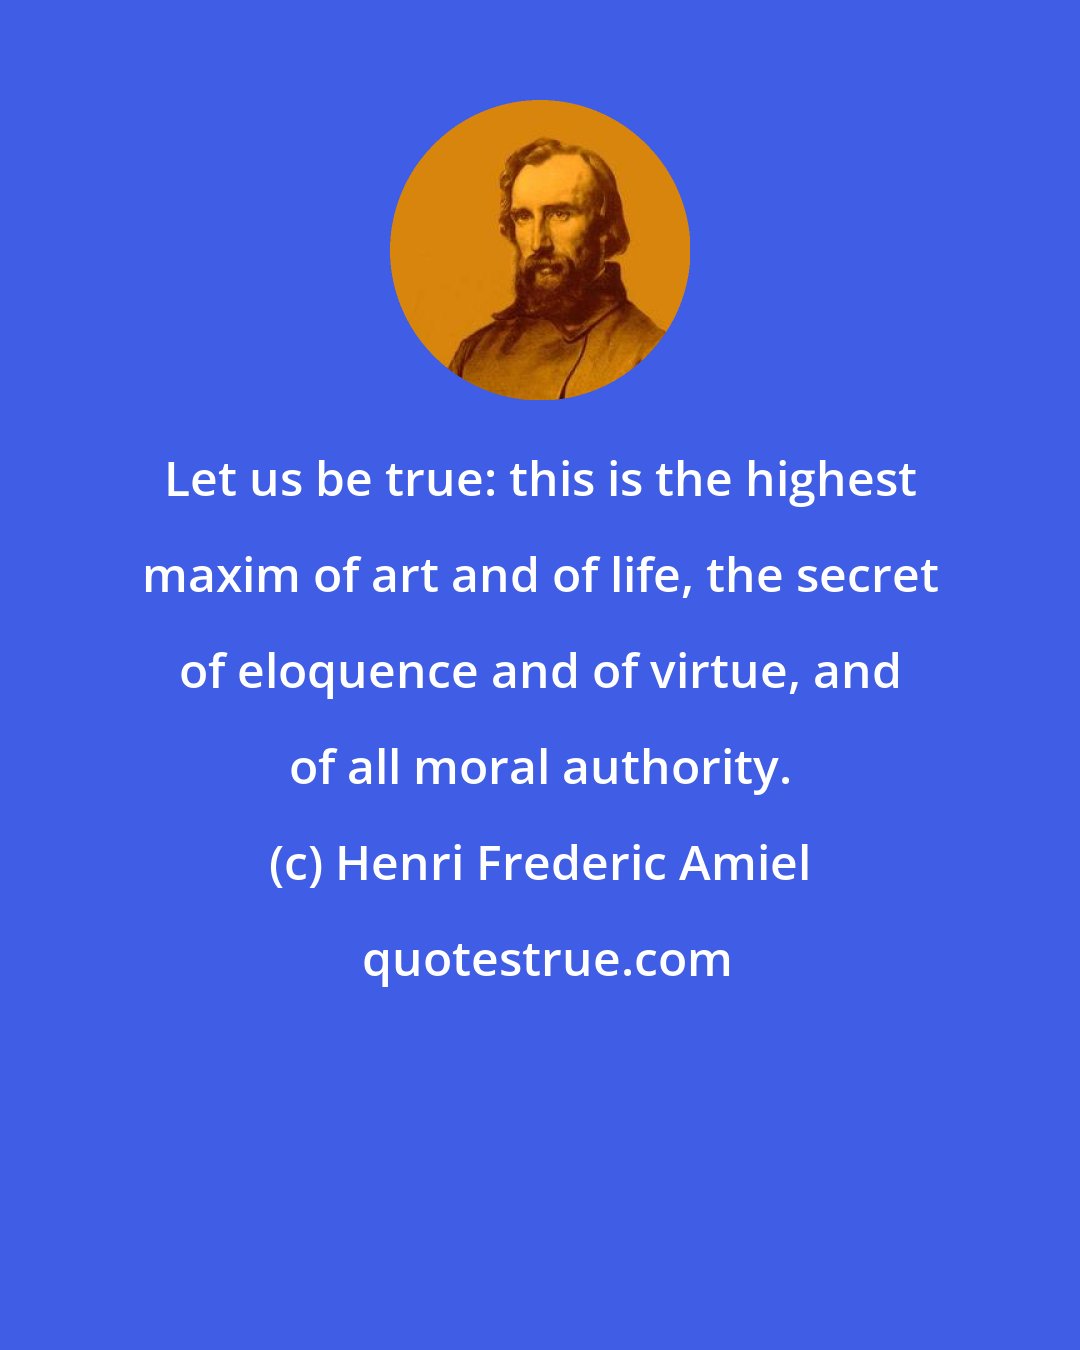 Henri Frederic Amiel: Let us be true: this is the highest maxim of art and of life, the secret of eloquence and of virtue, and of all moral authority.